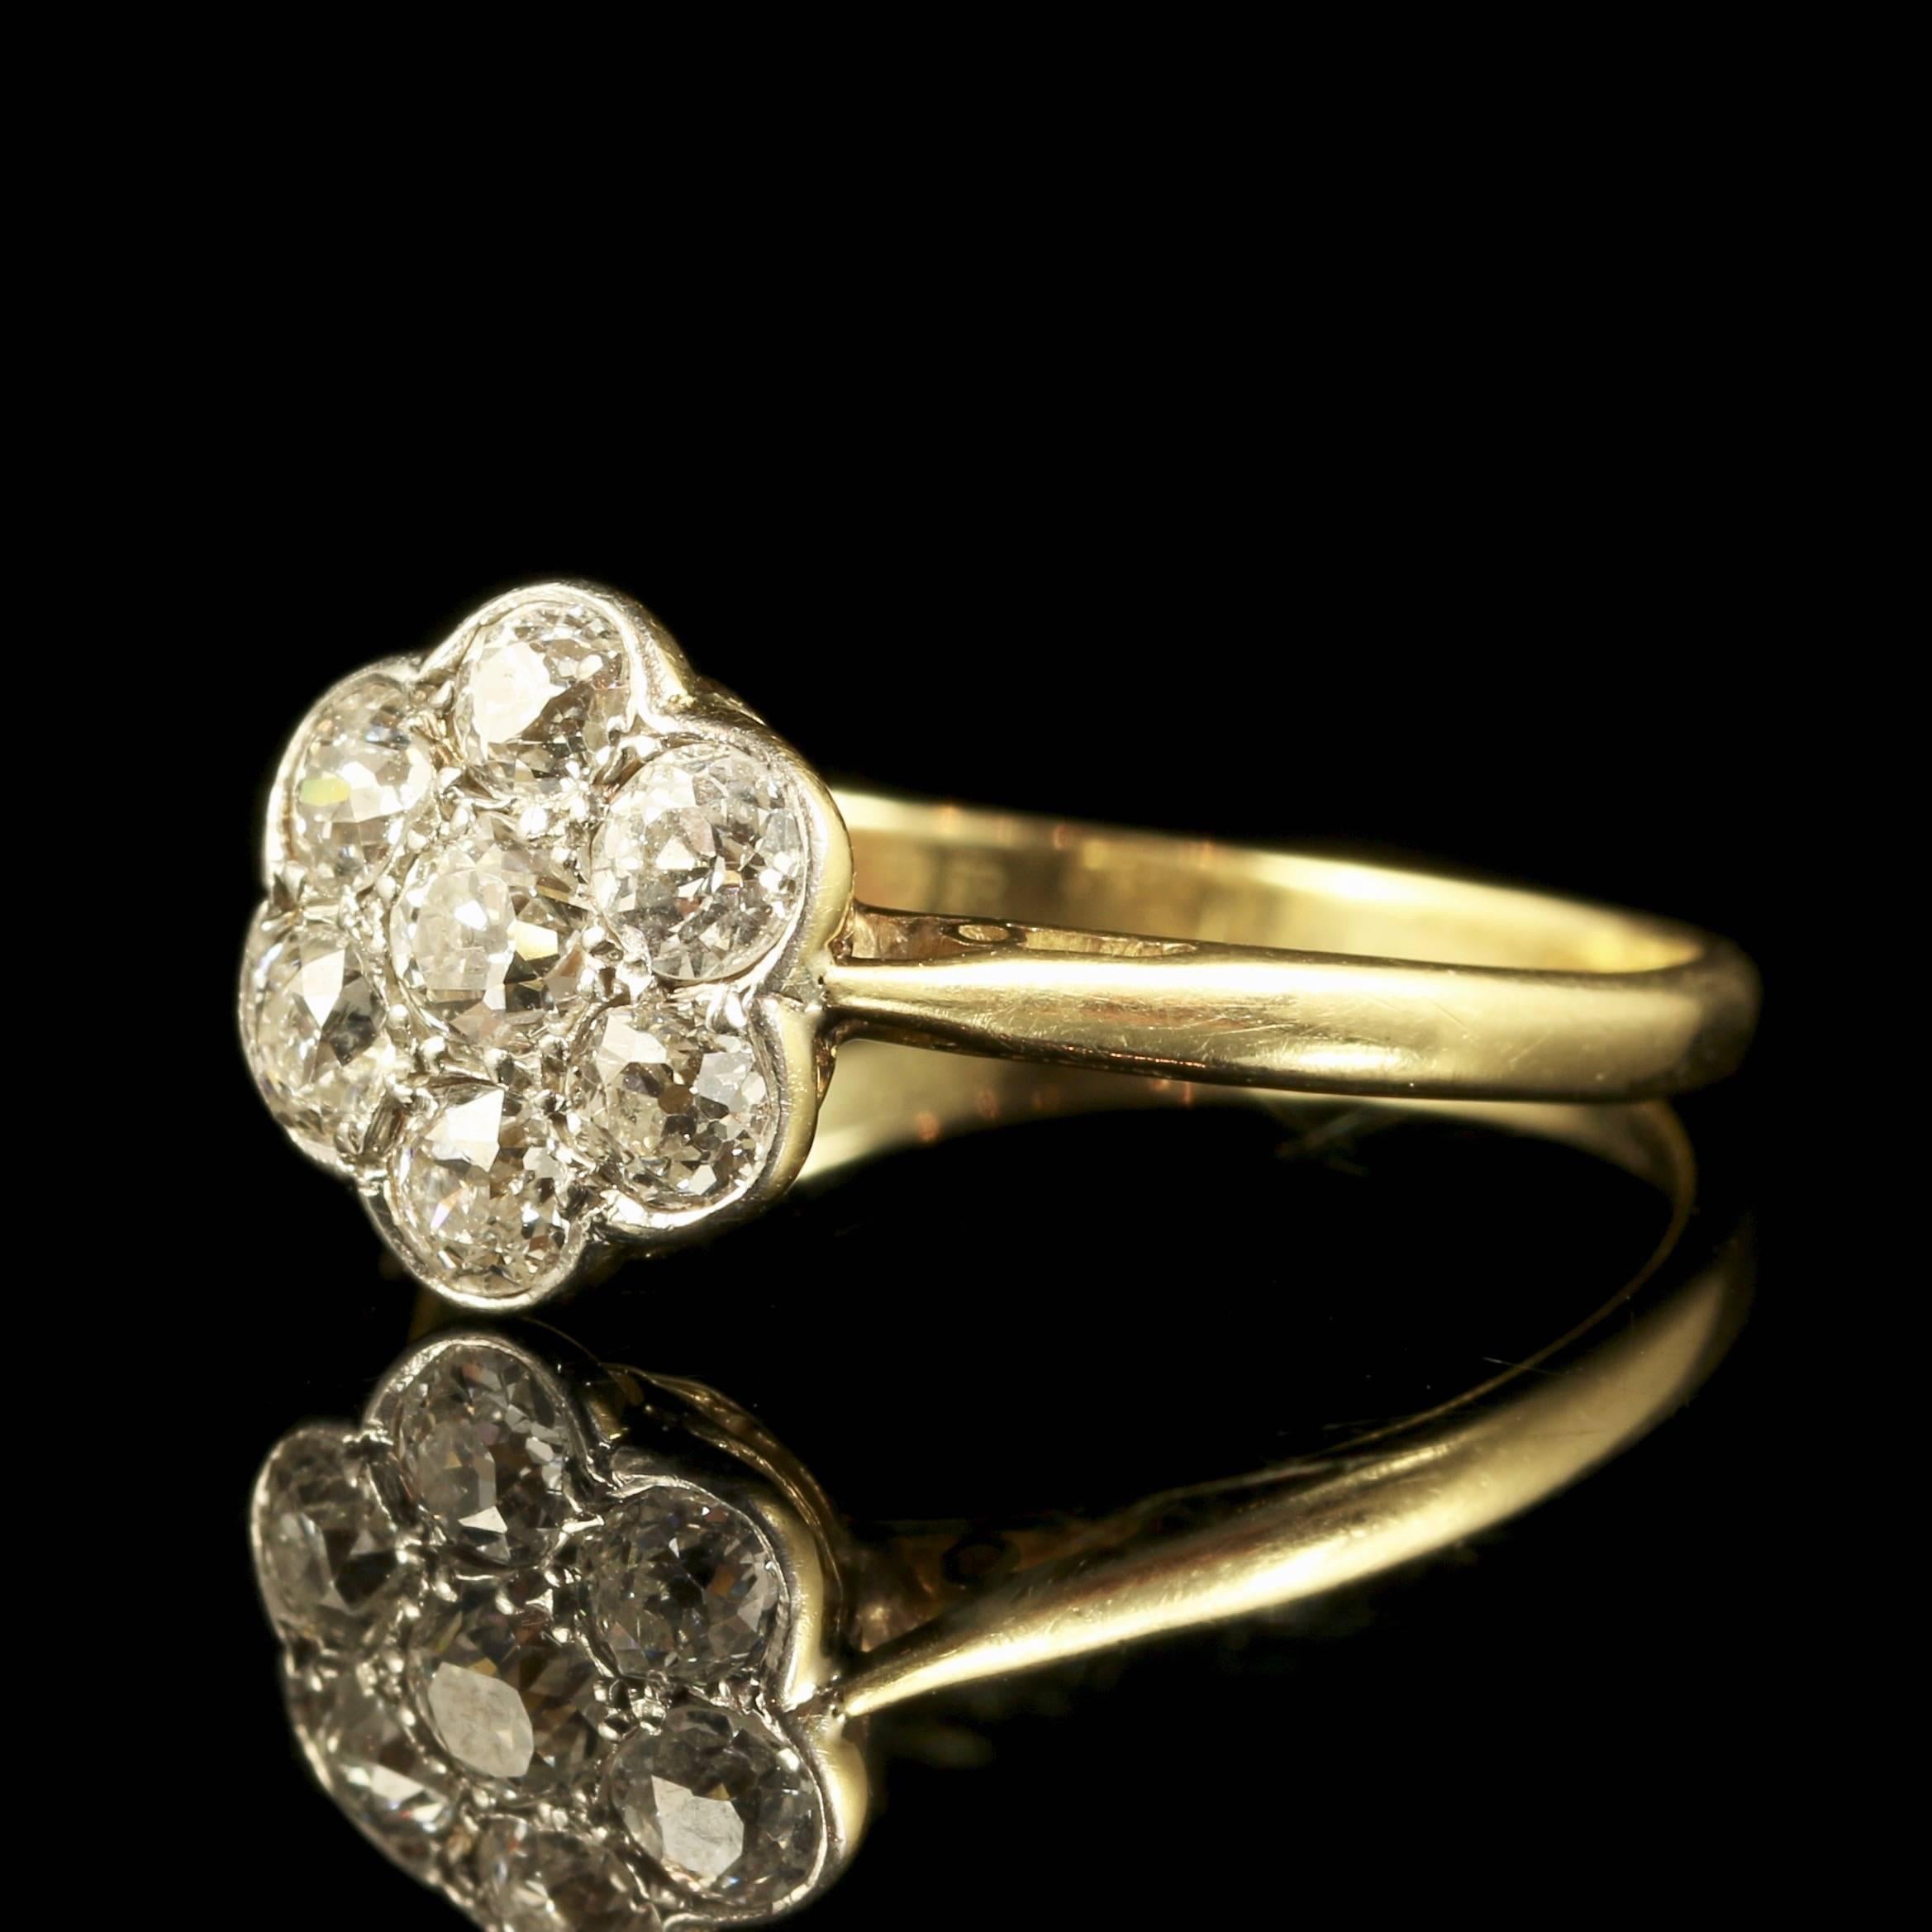 This beautiful Edwardian 18ct yellow gold and platinum ring boasts fabulous Old Cut Diamonds that have superb clarity and colour.

All original to the Edwardian period, a beautiful ring which will make a perfect engagement ring.

Approx. 0.65ct in